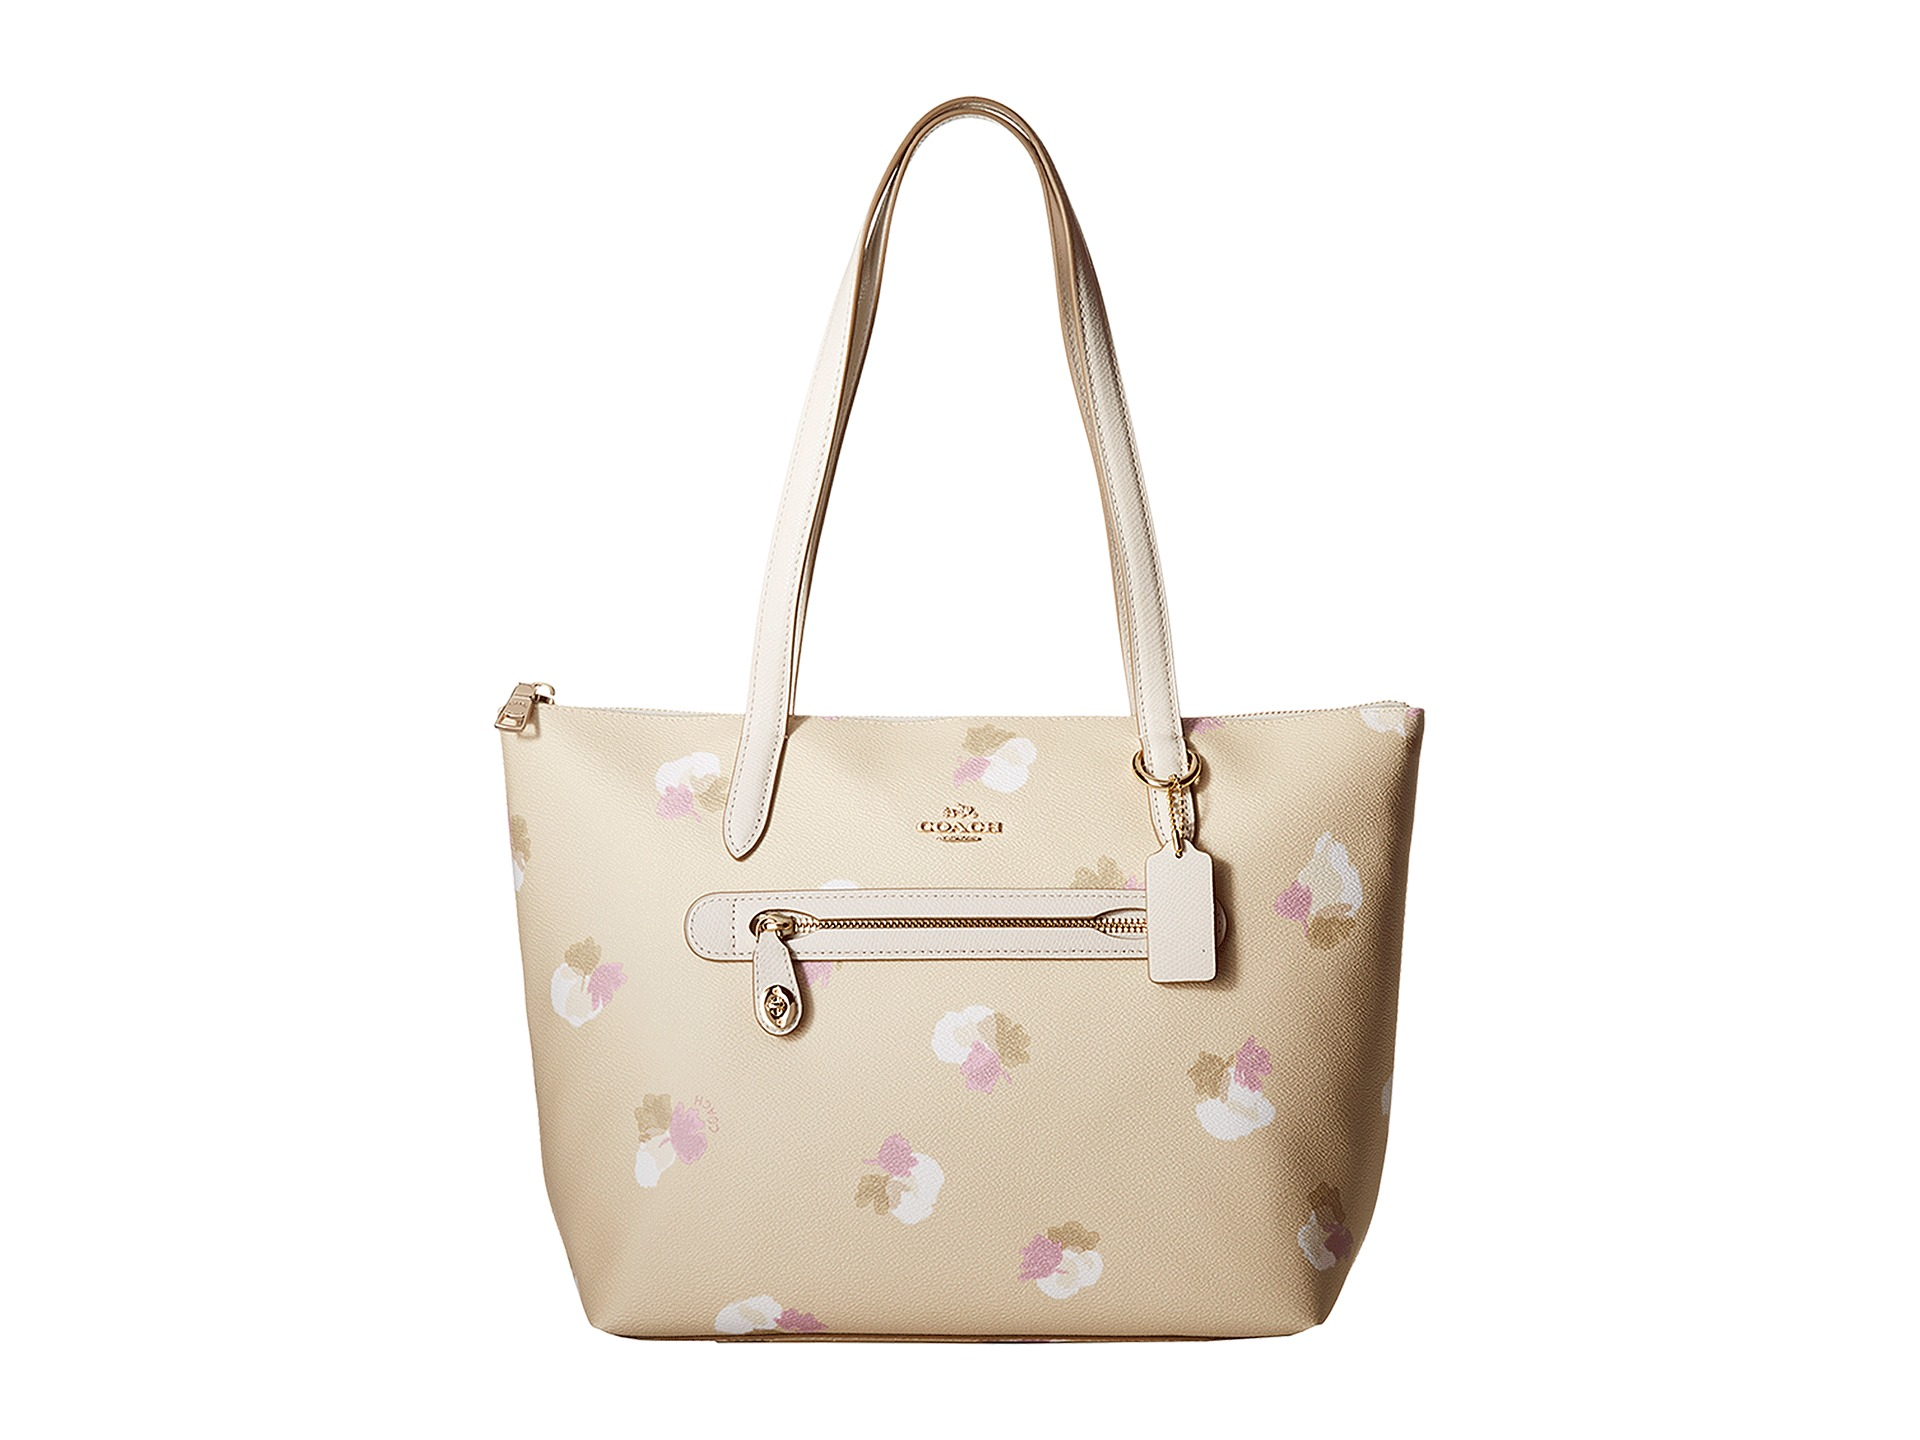 COACH Whls Floral Printed Taylor Tote in Natural - Lyst